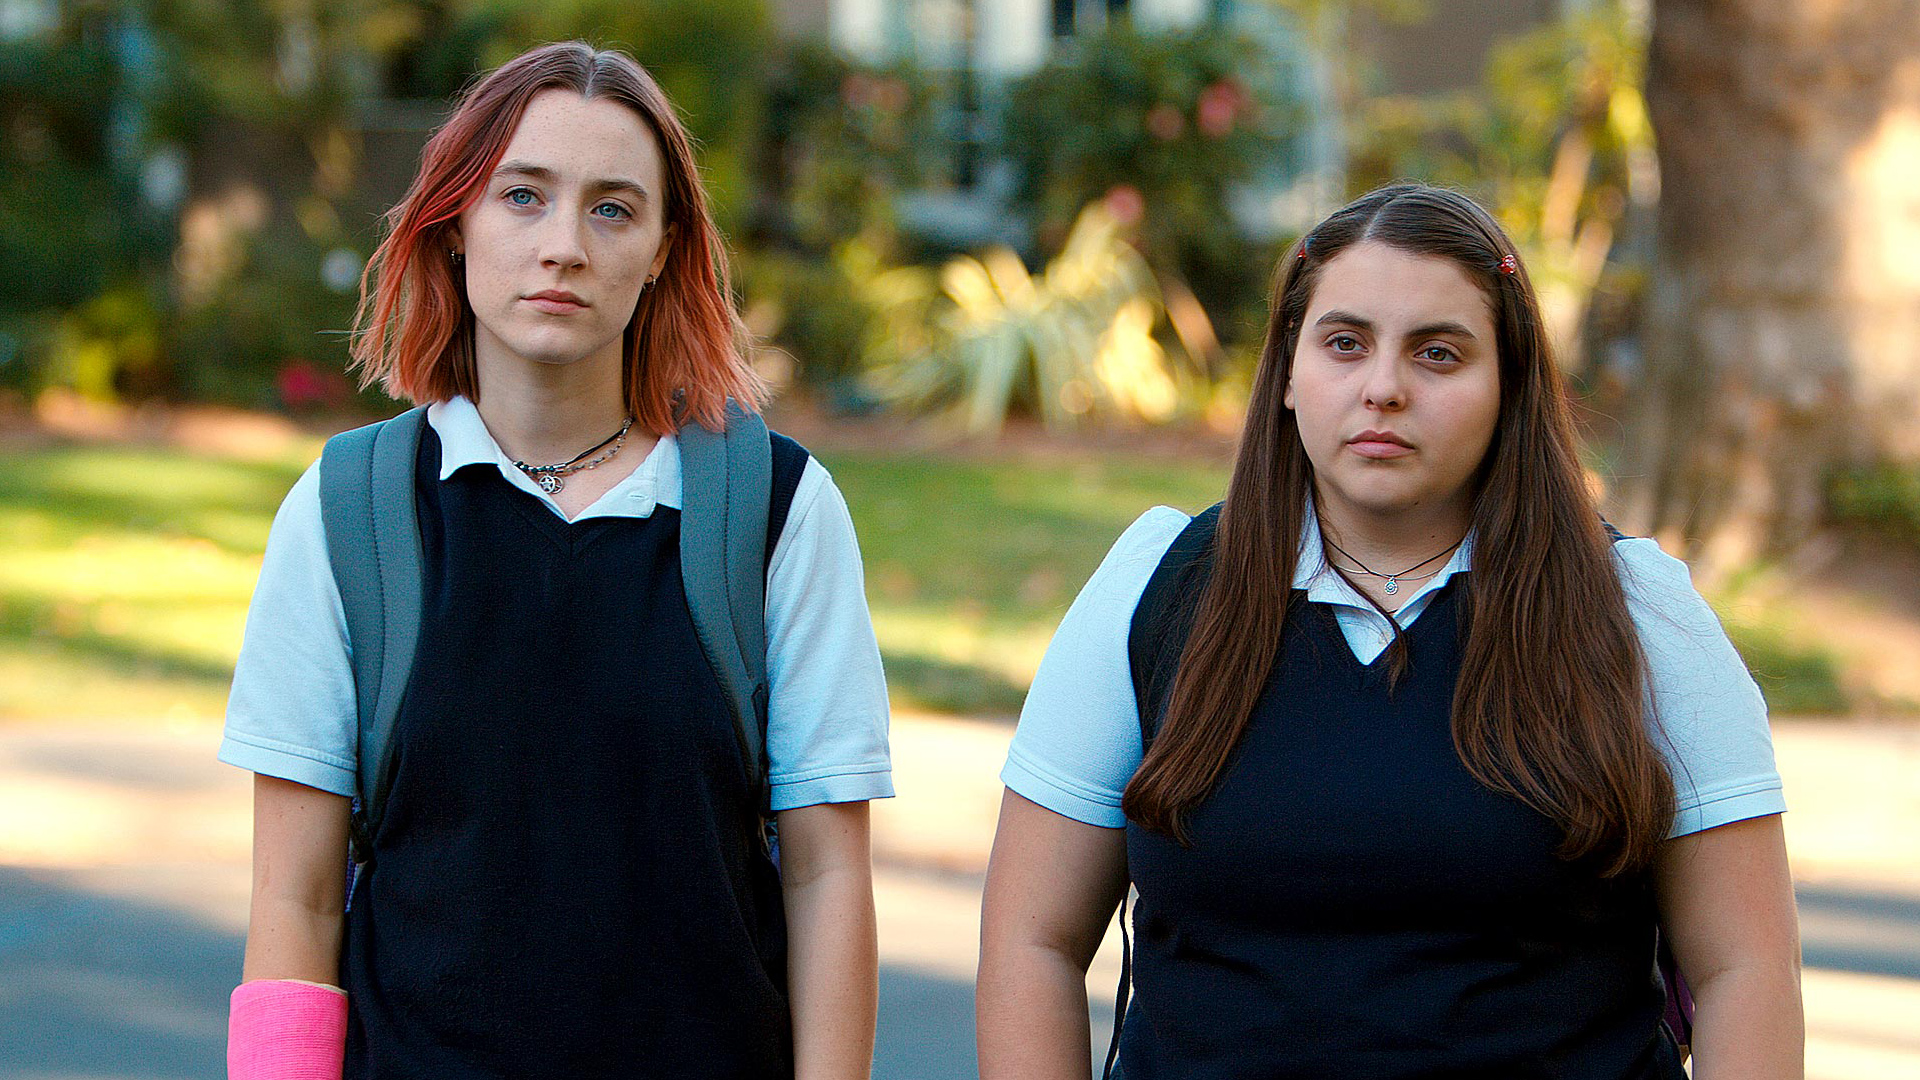 movie review of lady bird